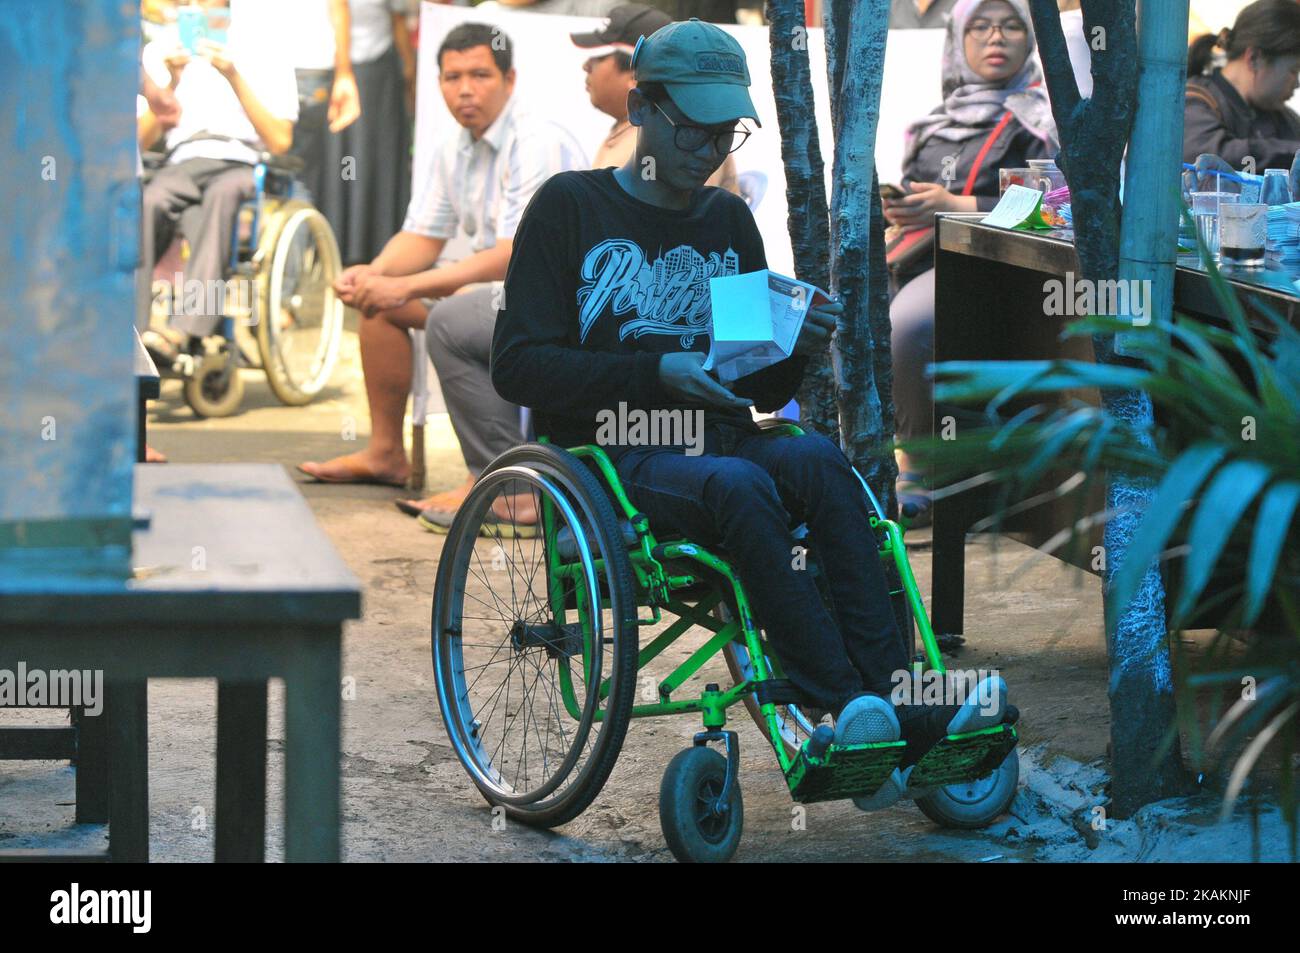 Persons disabilities to the voter booth during the implementation of Jakarta Election ballot in place of voting 43, Pondok Bambu Jakarta on February 15, 2017. The enthusiasm with Disabilities voted (nyoblos). Officers KPPS help guide to determine their voting rights during the implementation of the Jakarta Election ballot this Election Day simultaneously conducted throughout Indonesia to choose the leader of the Regions. Dasril Roszandi (Photo by Dasril Roszandi/NurPhoto) *** Please Use Credit from Credit Field *** Stock Photo